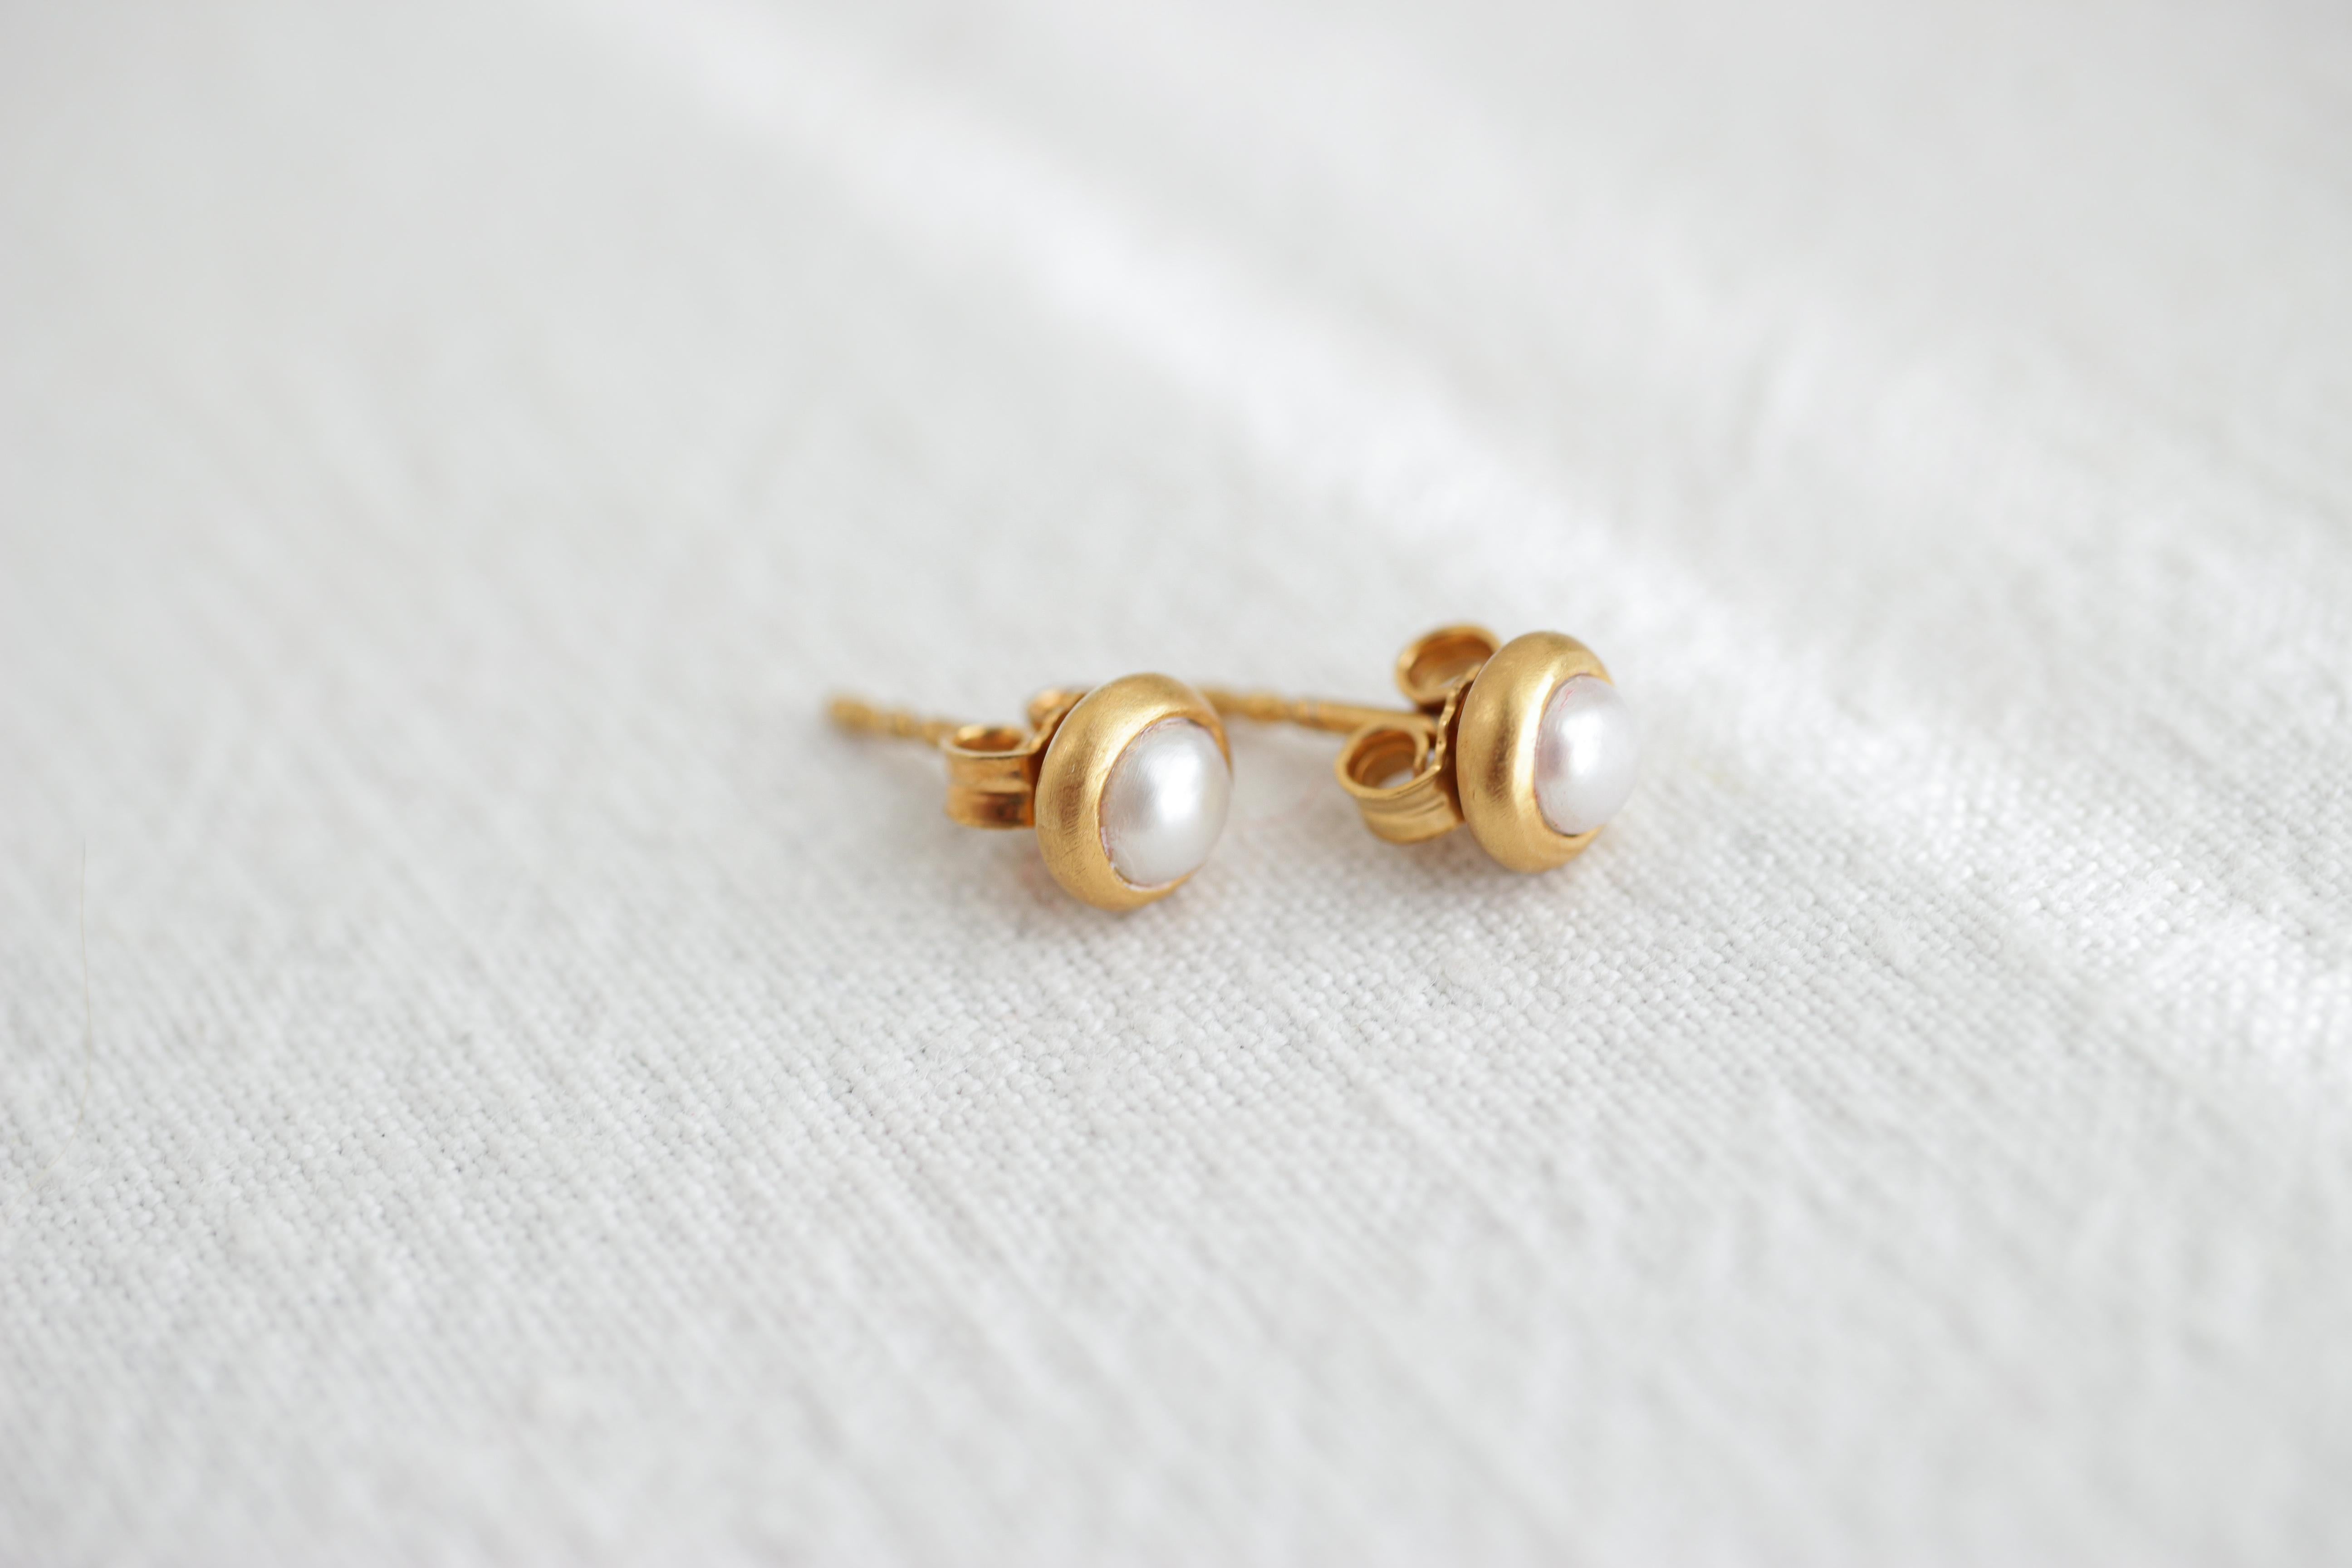 The gold plated Pearl Ear-studs made from Sterling Silver delicately present themselves through their glowing spark.

 

The ear-studs are part of the Pearl Classics and symbolize the natural beauty and high quality designs of Monika Herré.